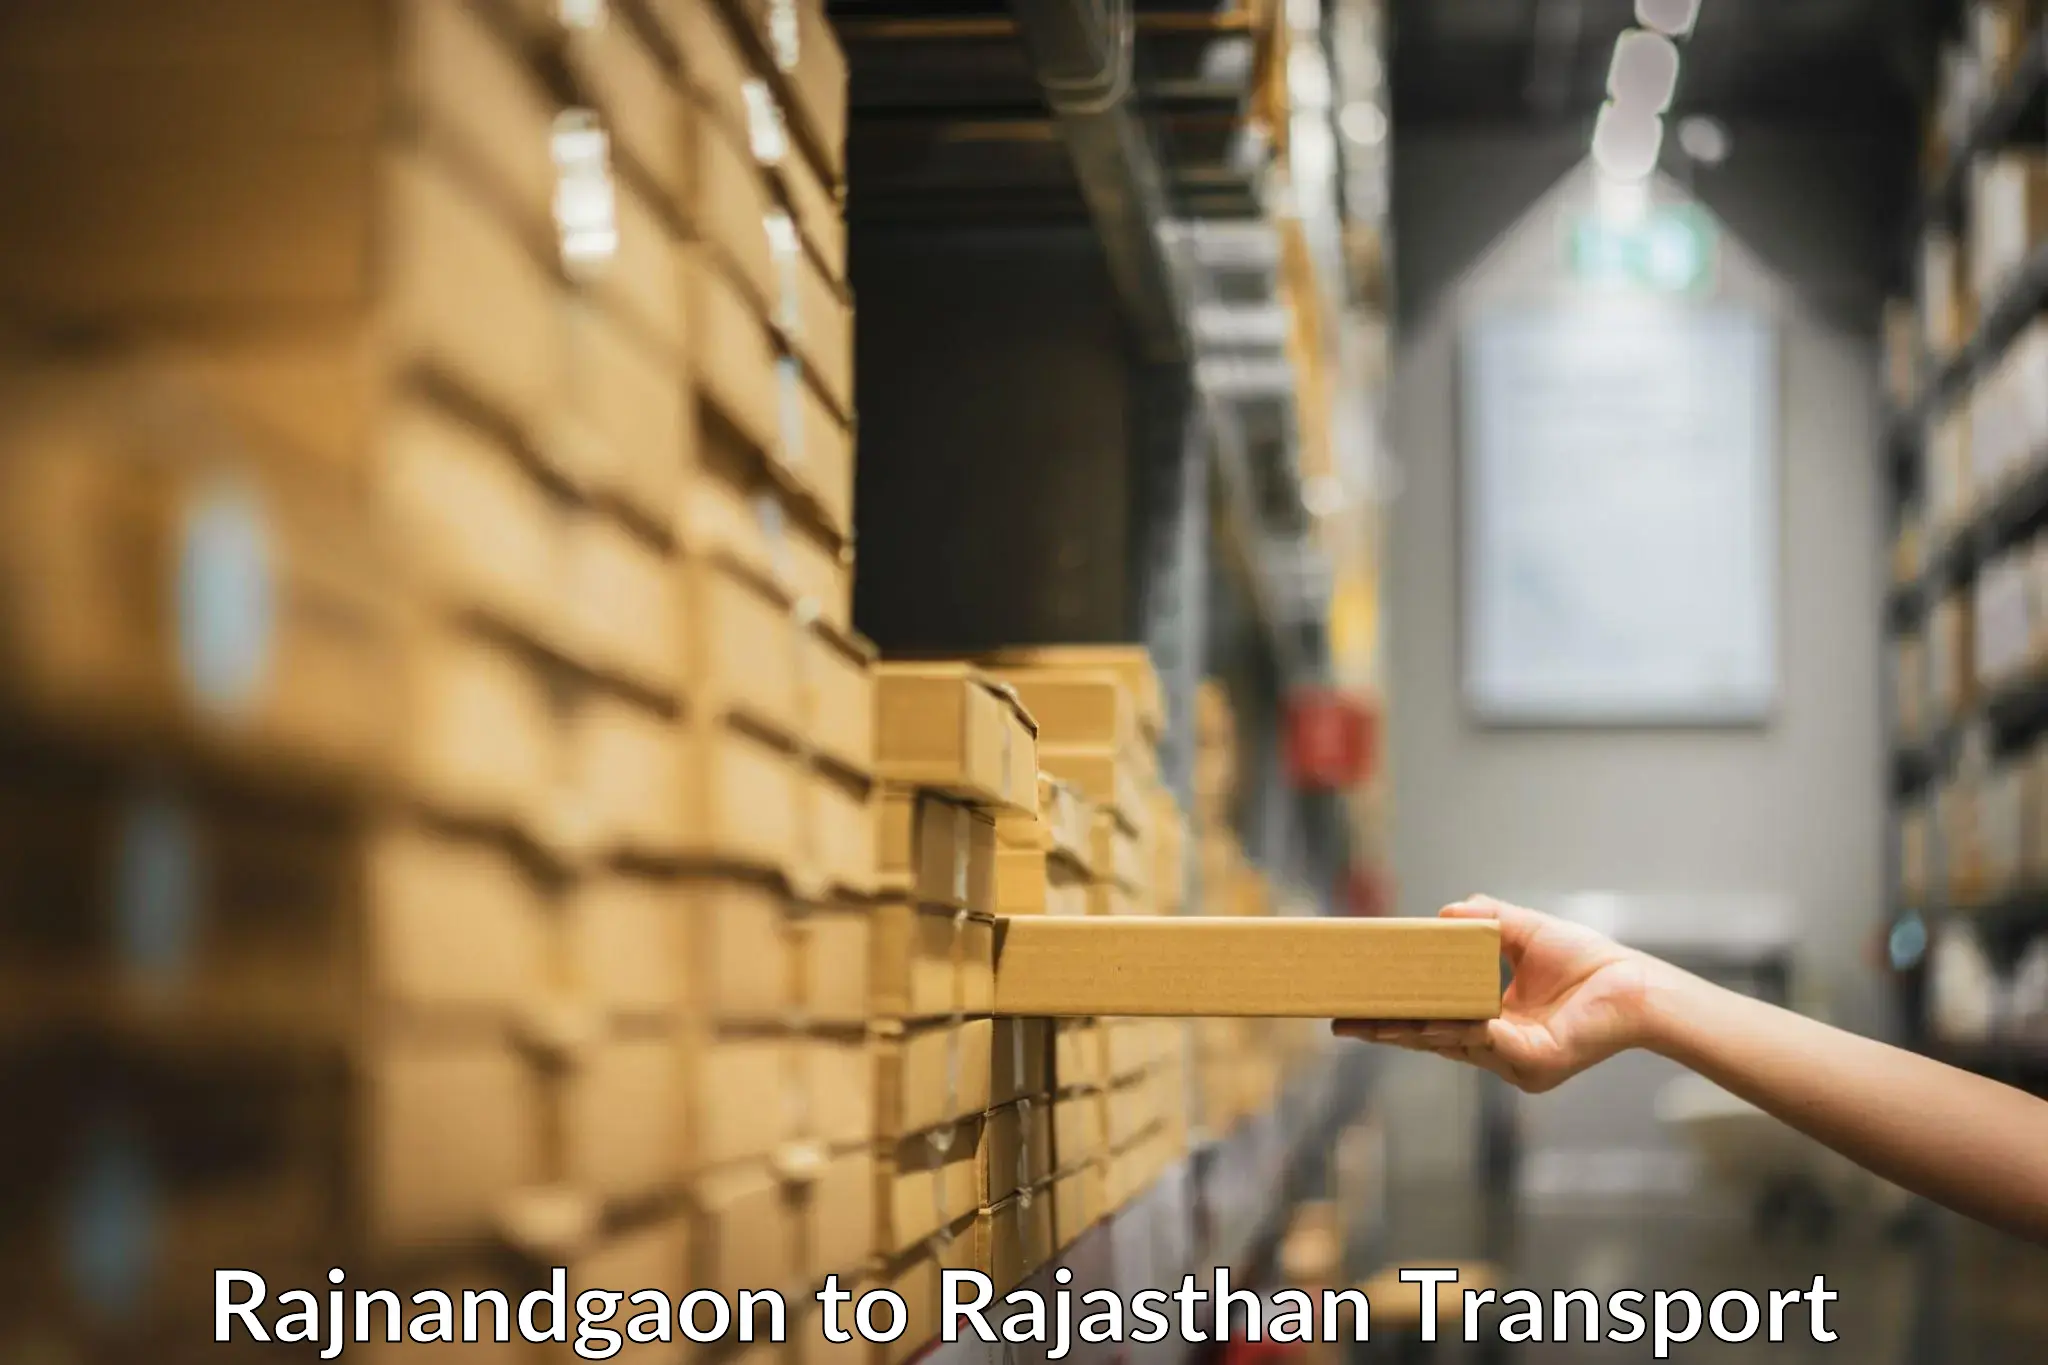 Truck transport companies in India Rajnandgaon to Rajasthan